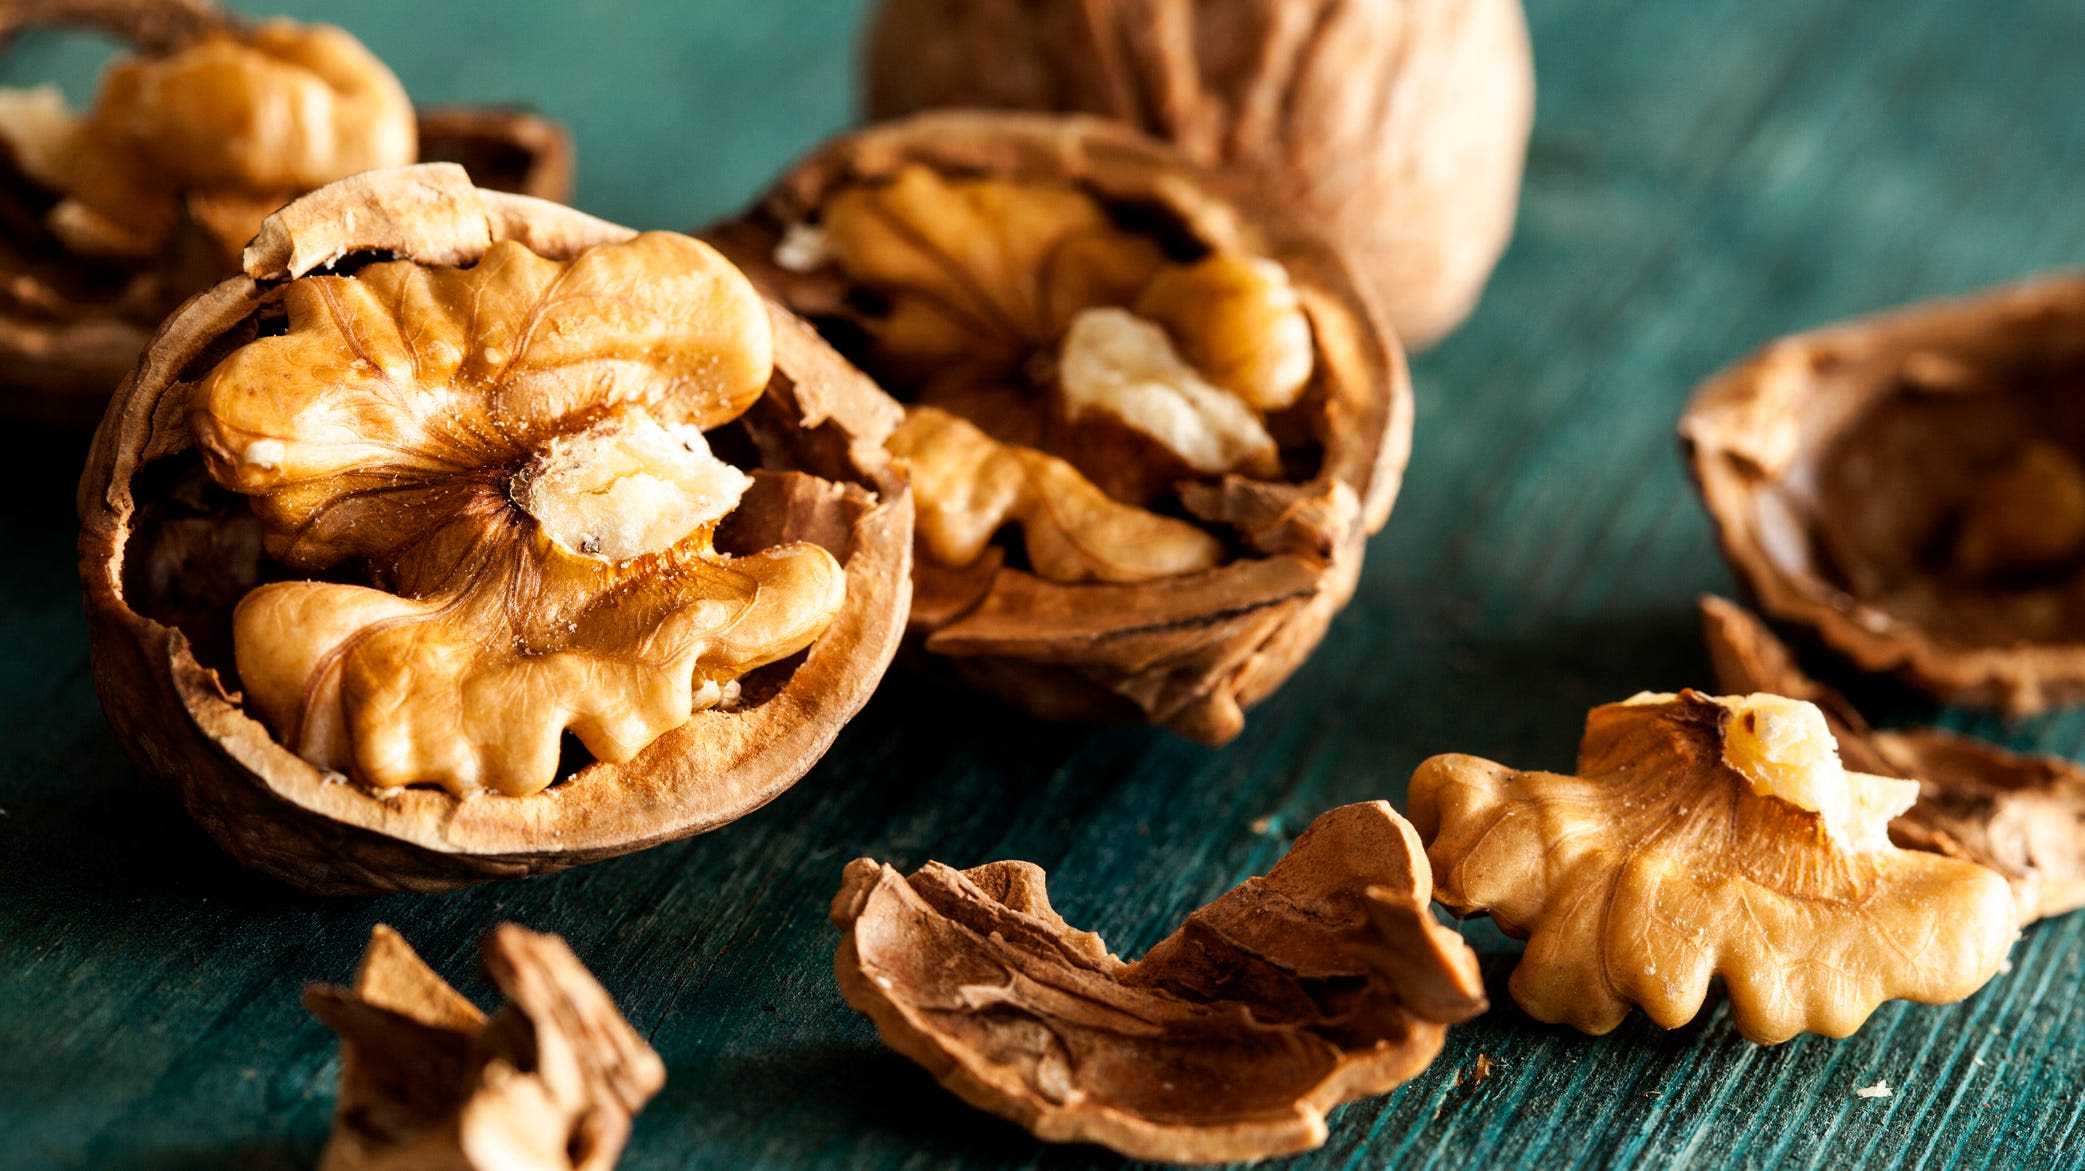 Walnuts sold in Arizona are being recalled due to E.coli. Here’s what you need to know